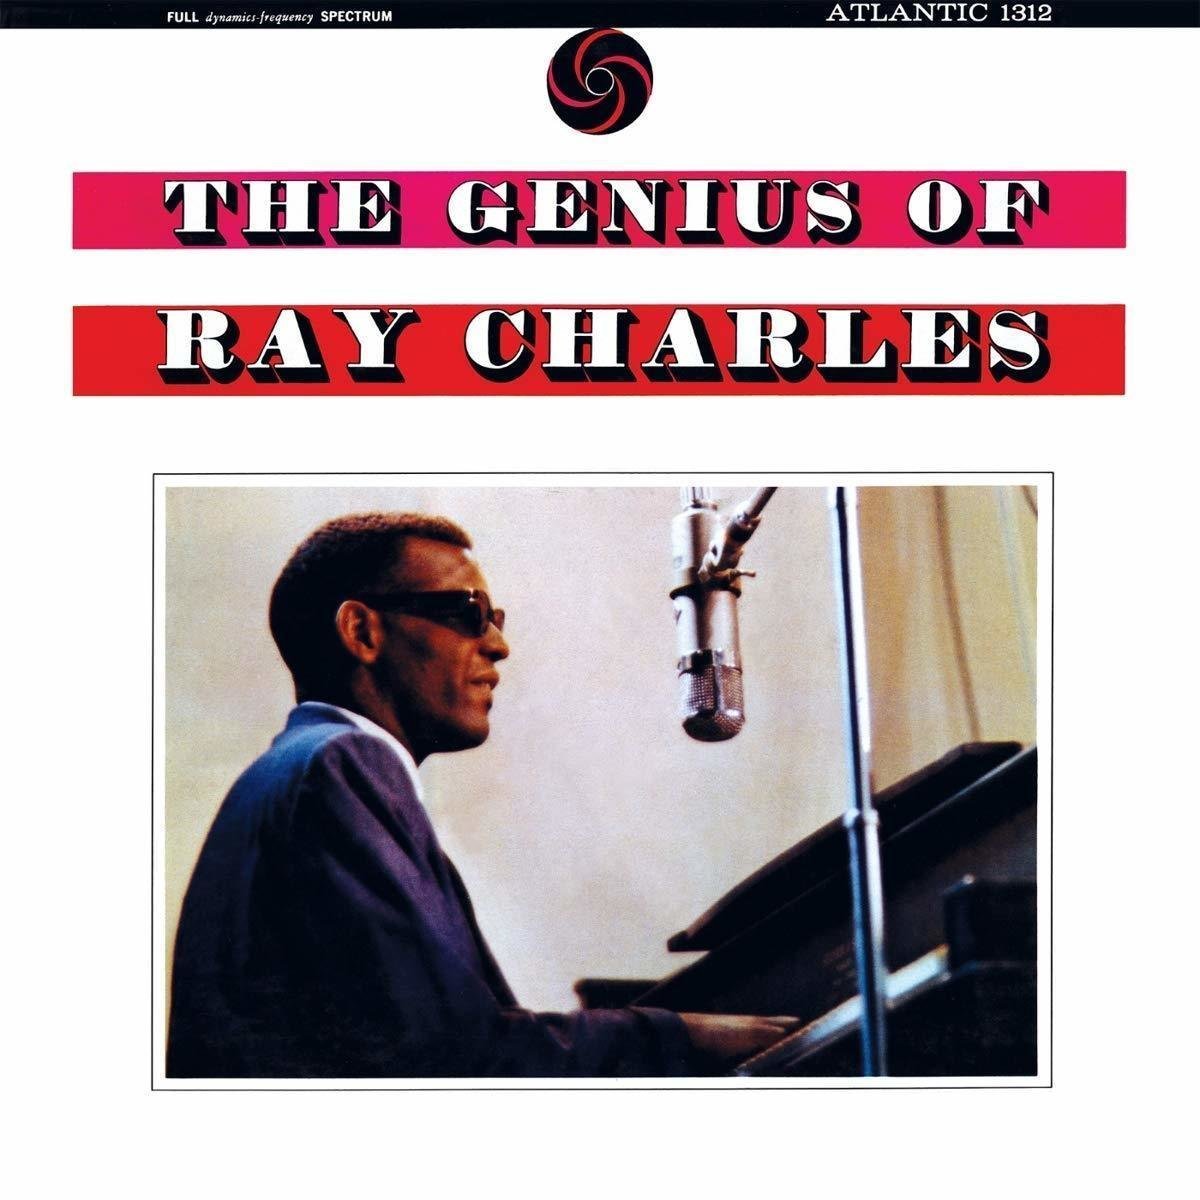 Disco in vinile Ray Charles - The Genius Of Ray Charles (Mono) (LP)